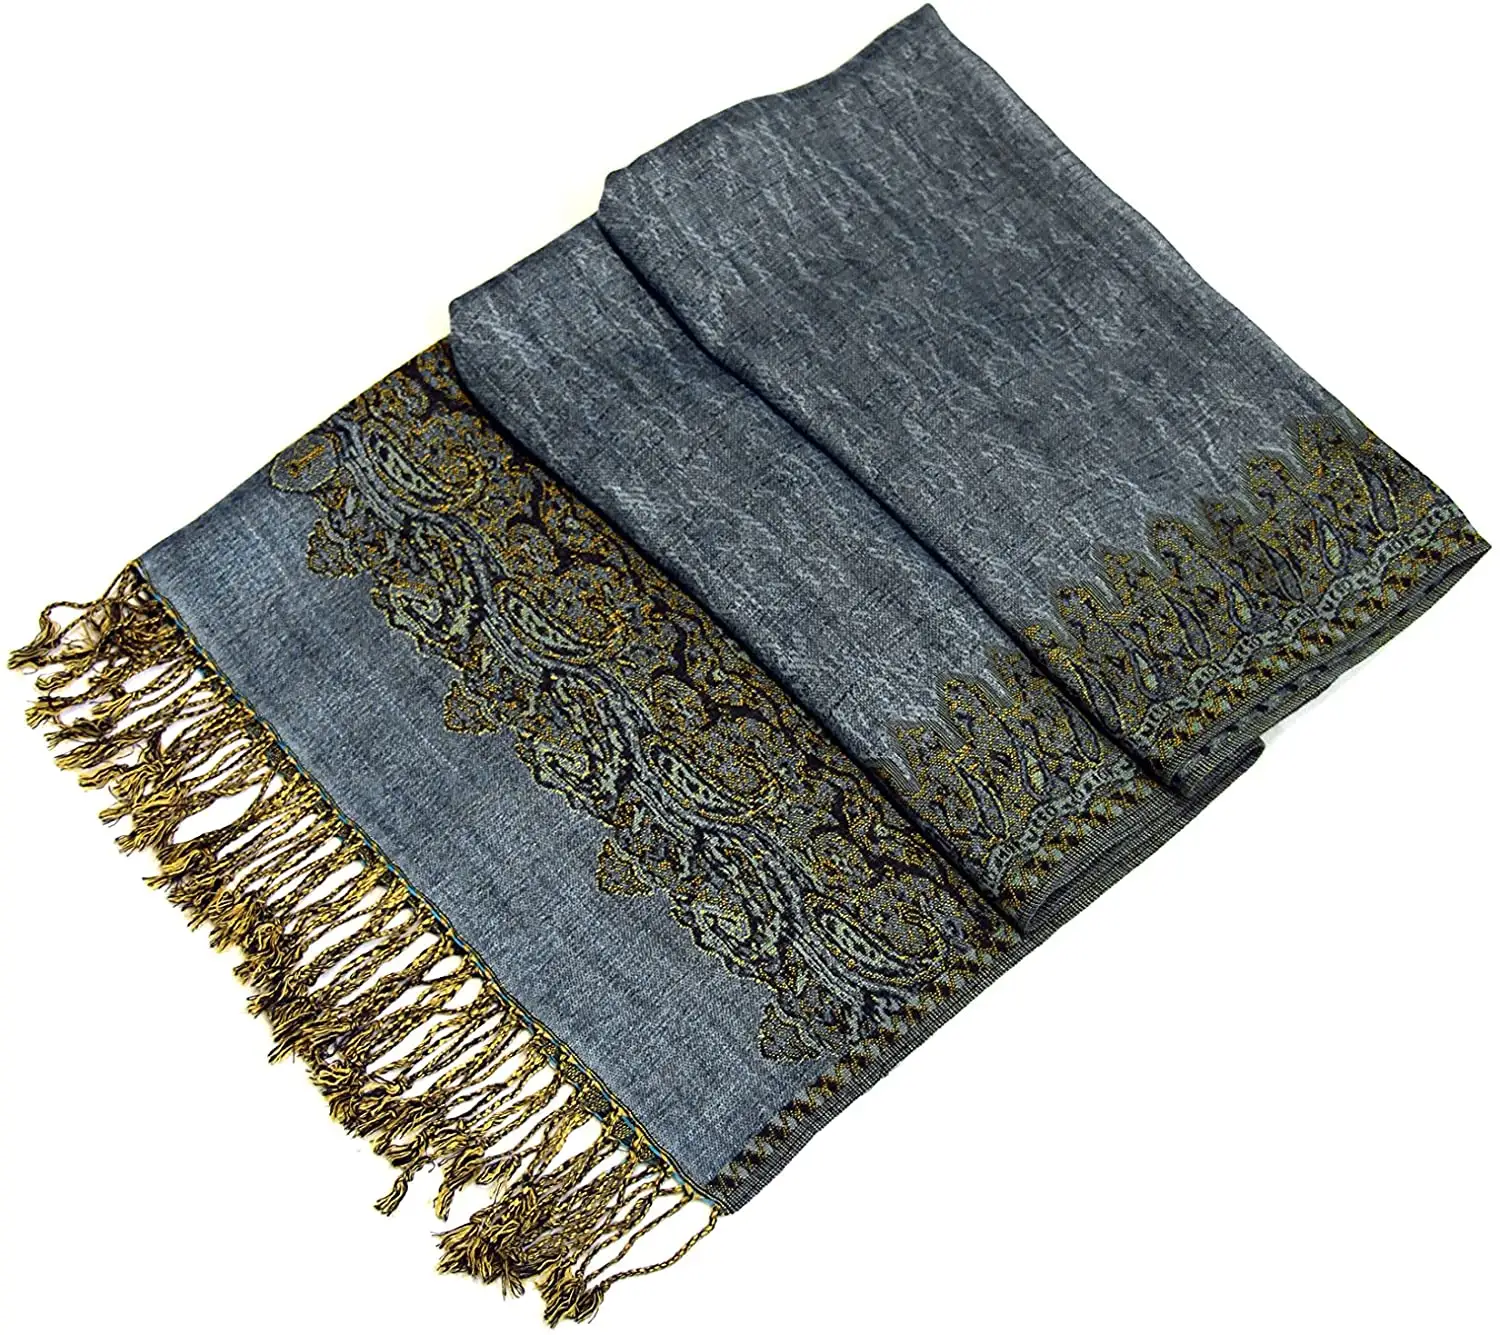 Layered Reversible Woven Pashmina Shawl Scarf Wrap Stole Cashmere for women